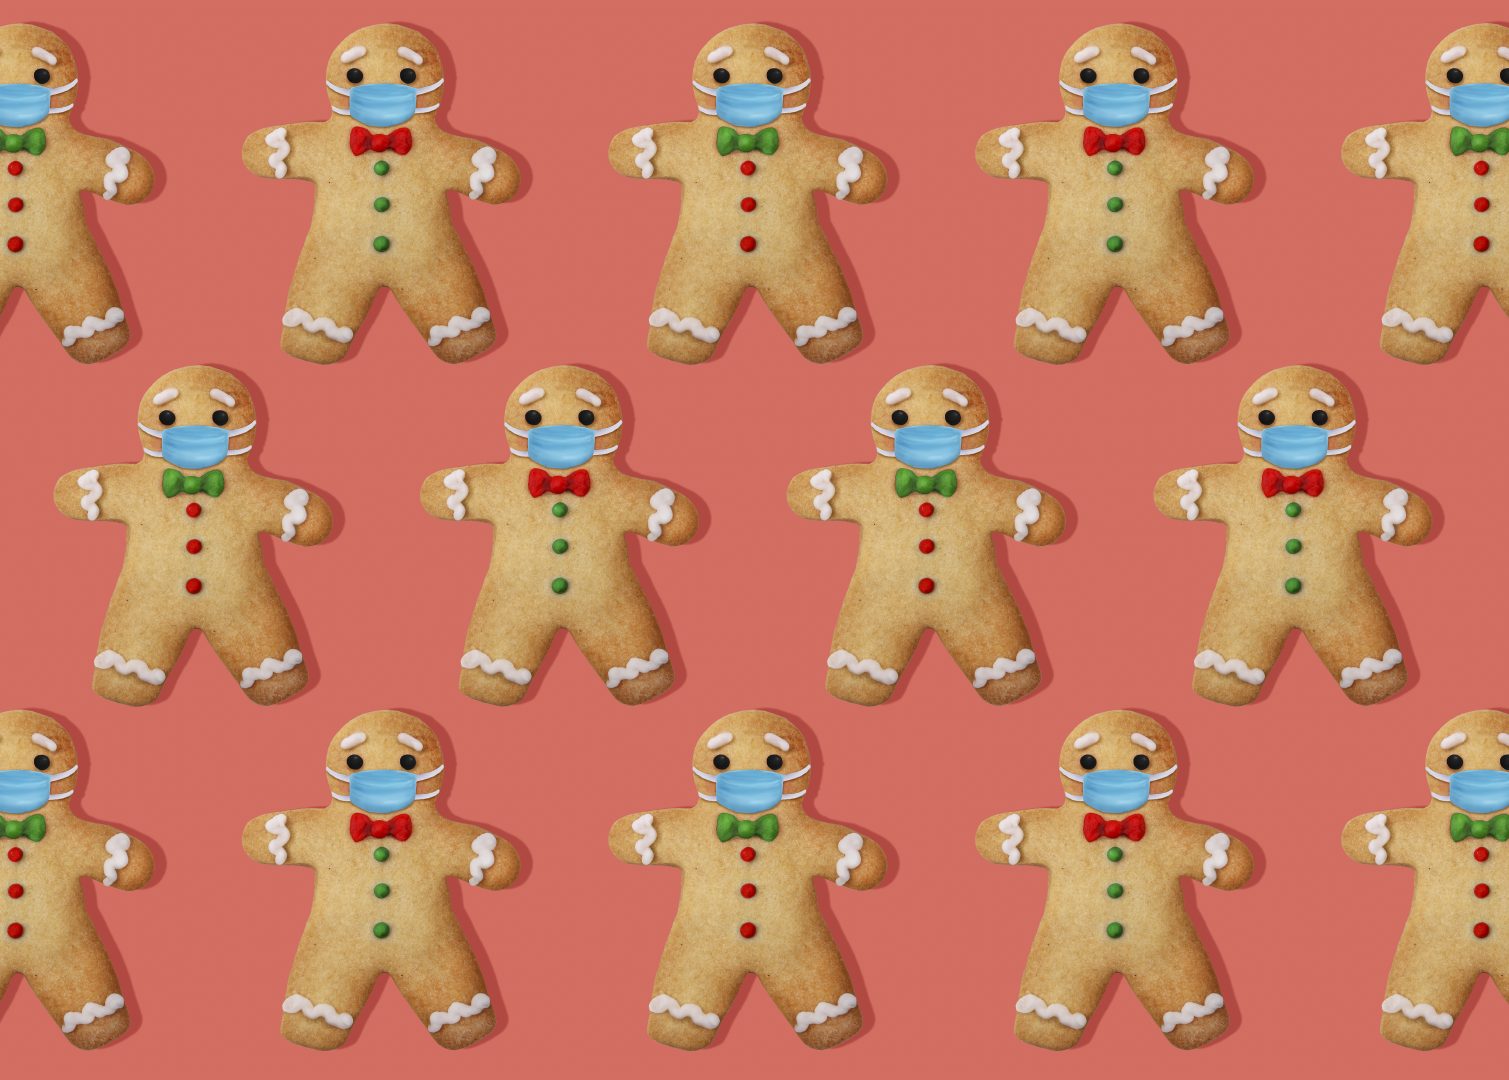 Gingerbread man cookies with surgical masks.